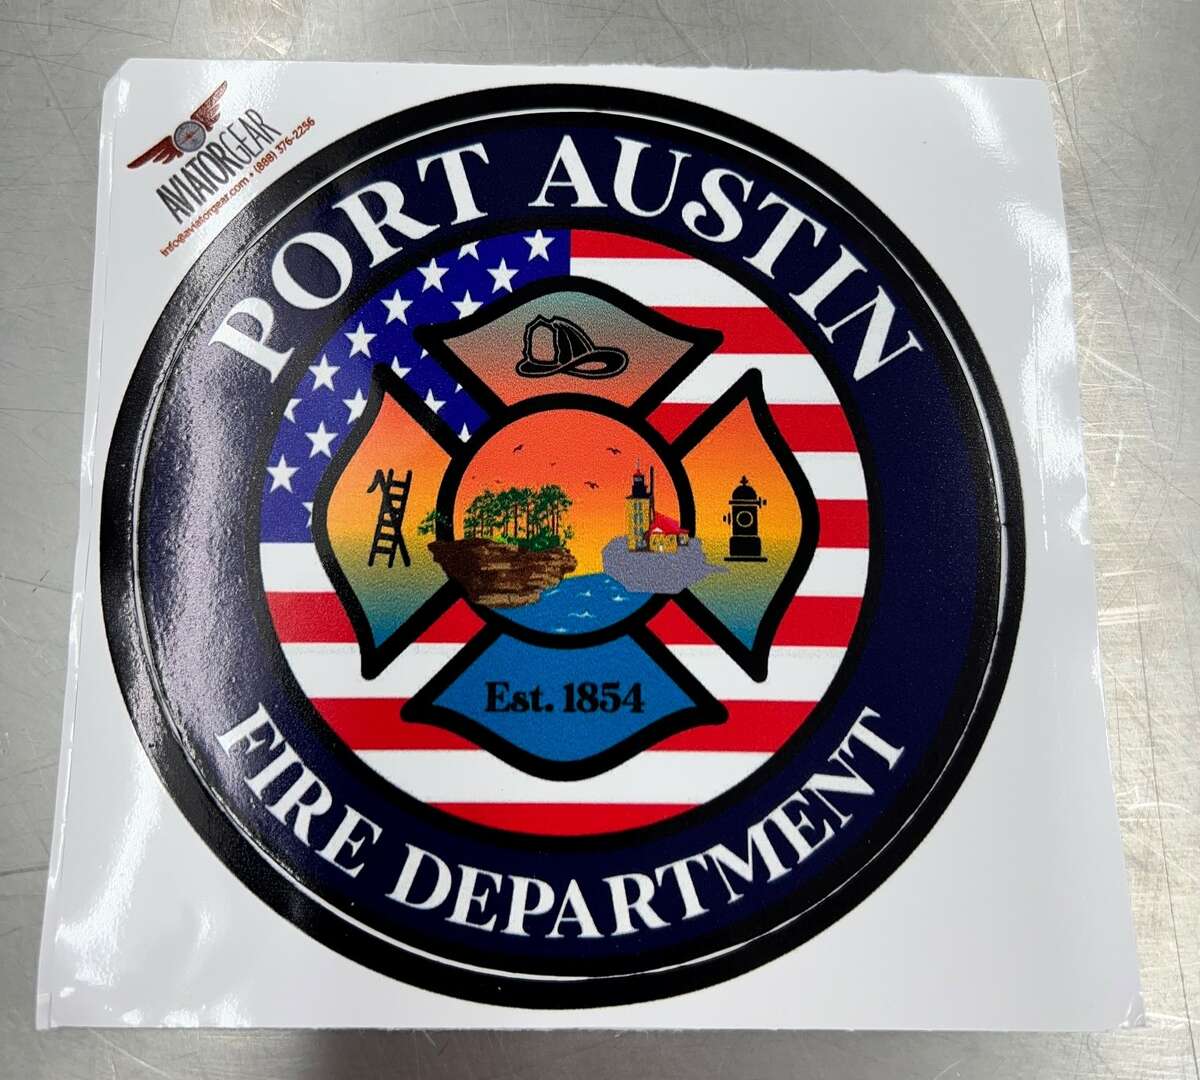 Port Austin Fire Department stickers and T-shirts are up for grabs at Port Austin Hardware.